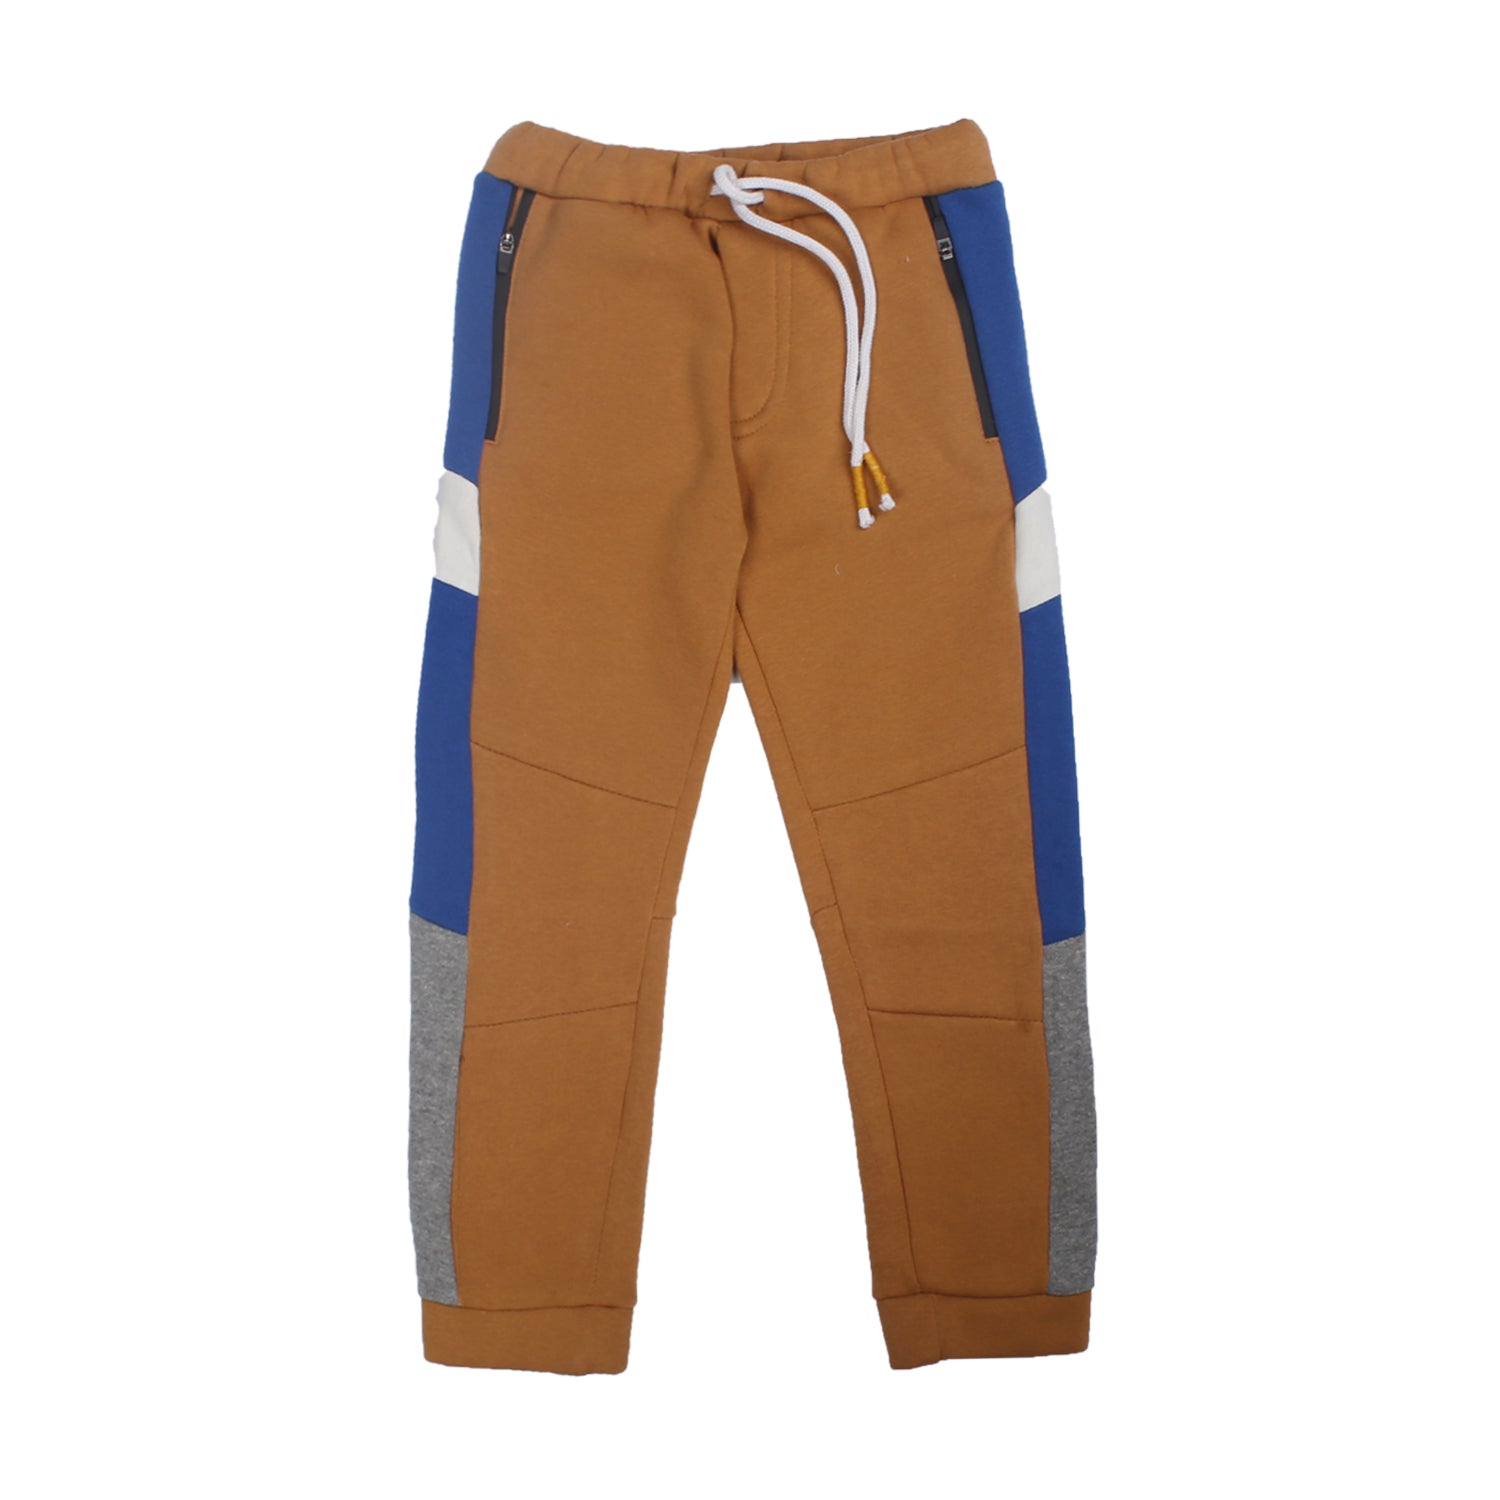 NEW MUSTARD WITH 3 TONE COLOURS JOGGER PANTS TROUSER